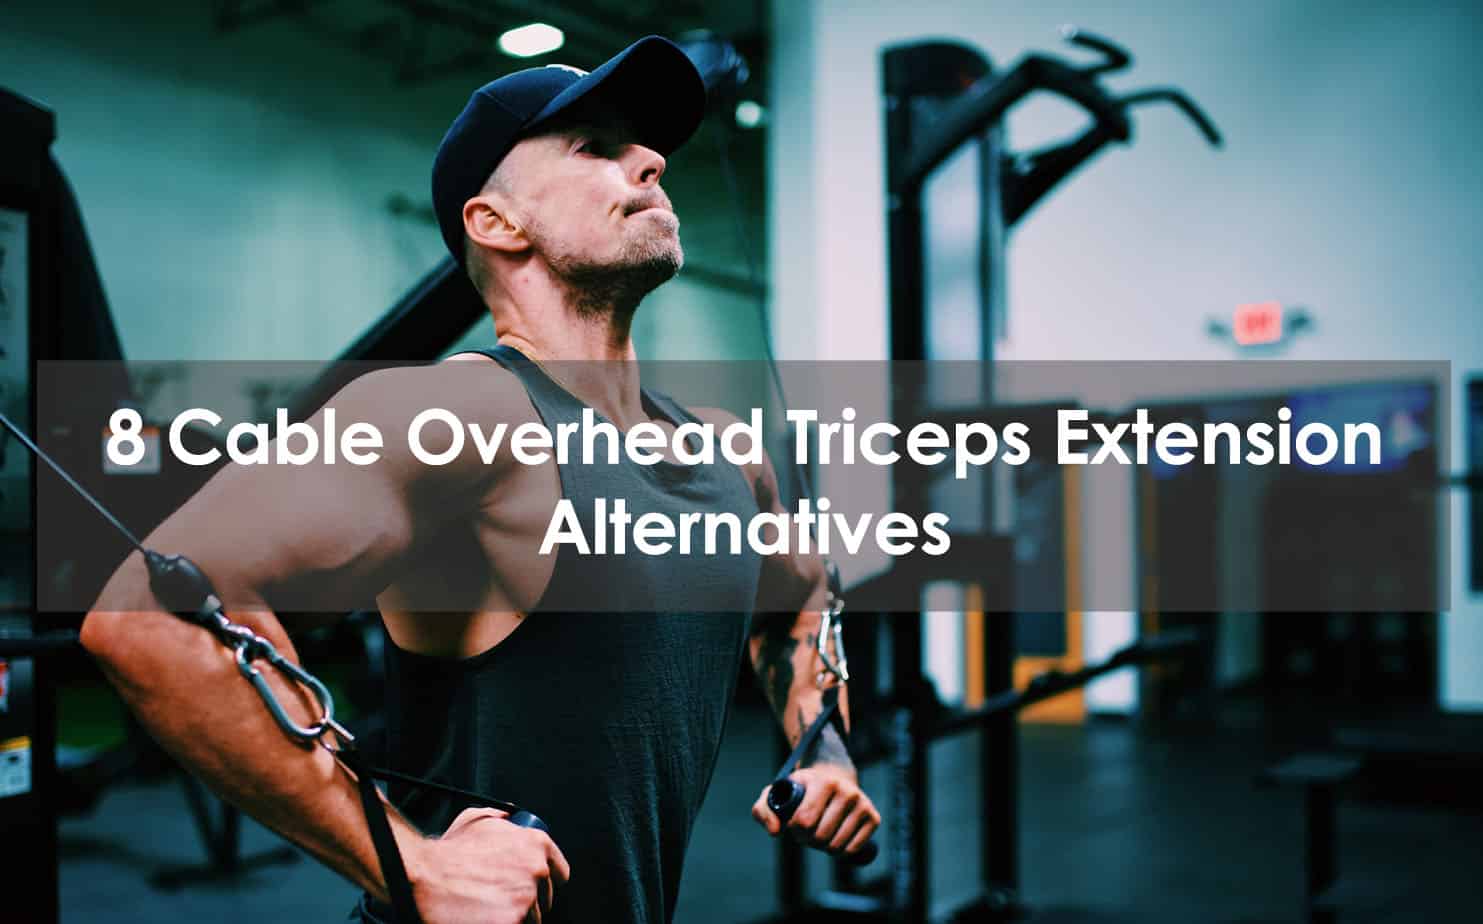 8 Cable Overhead Triceps Extension Alternatives